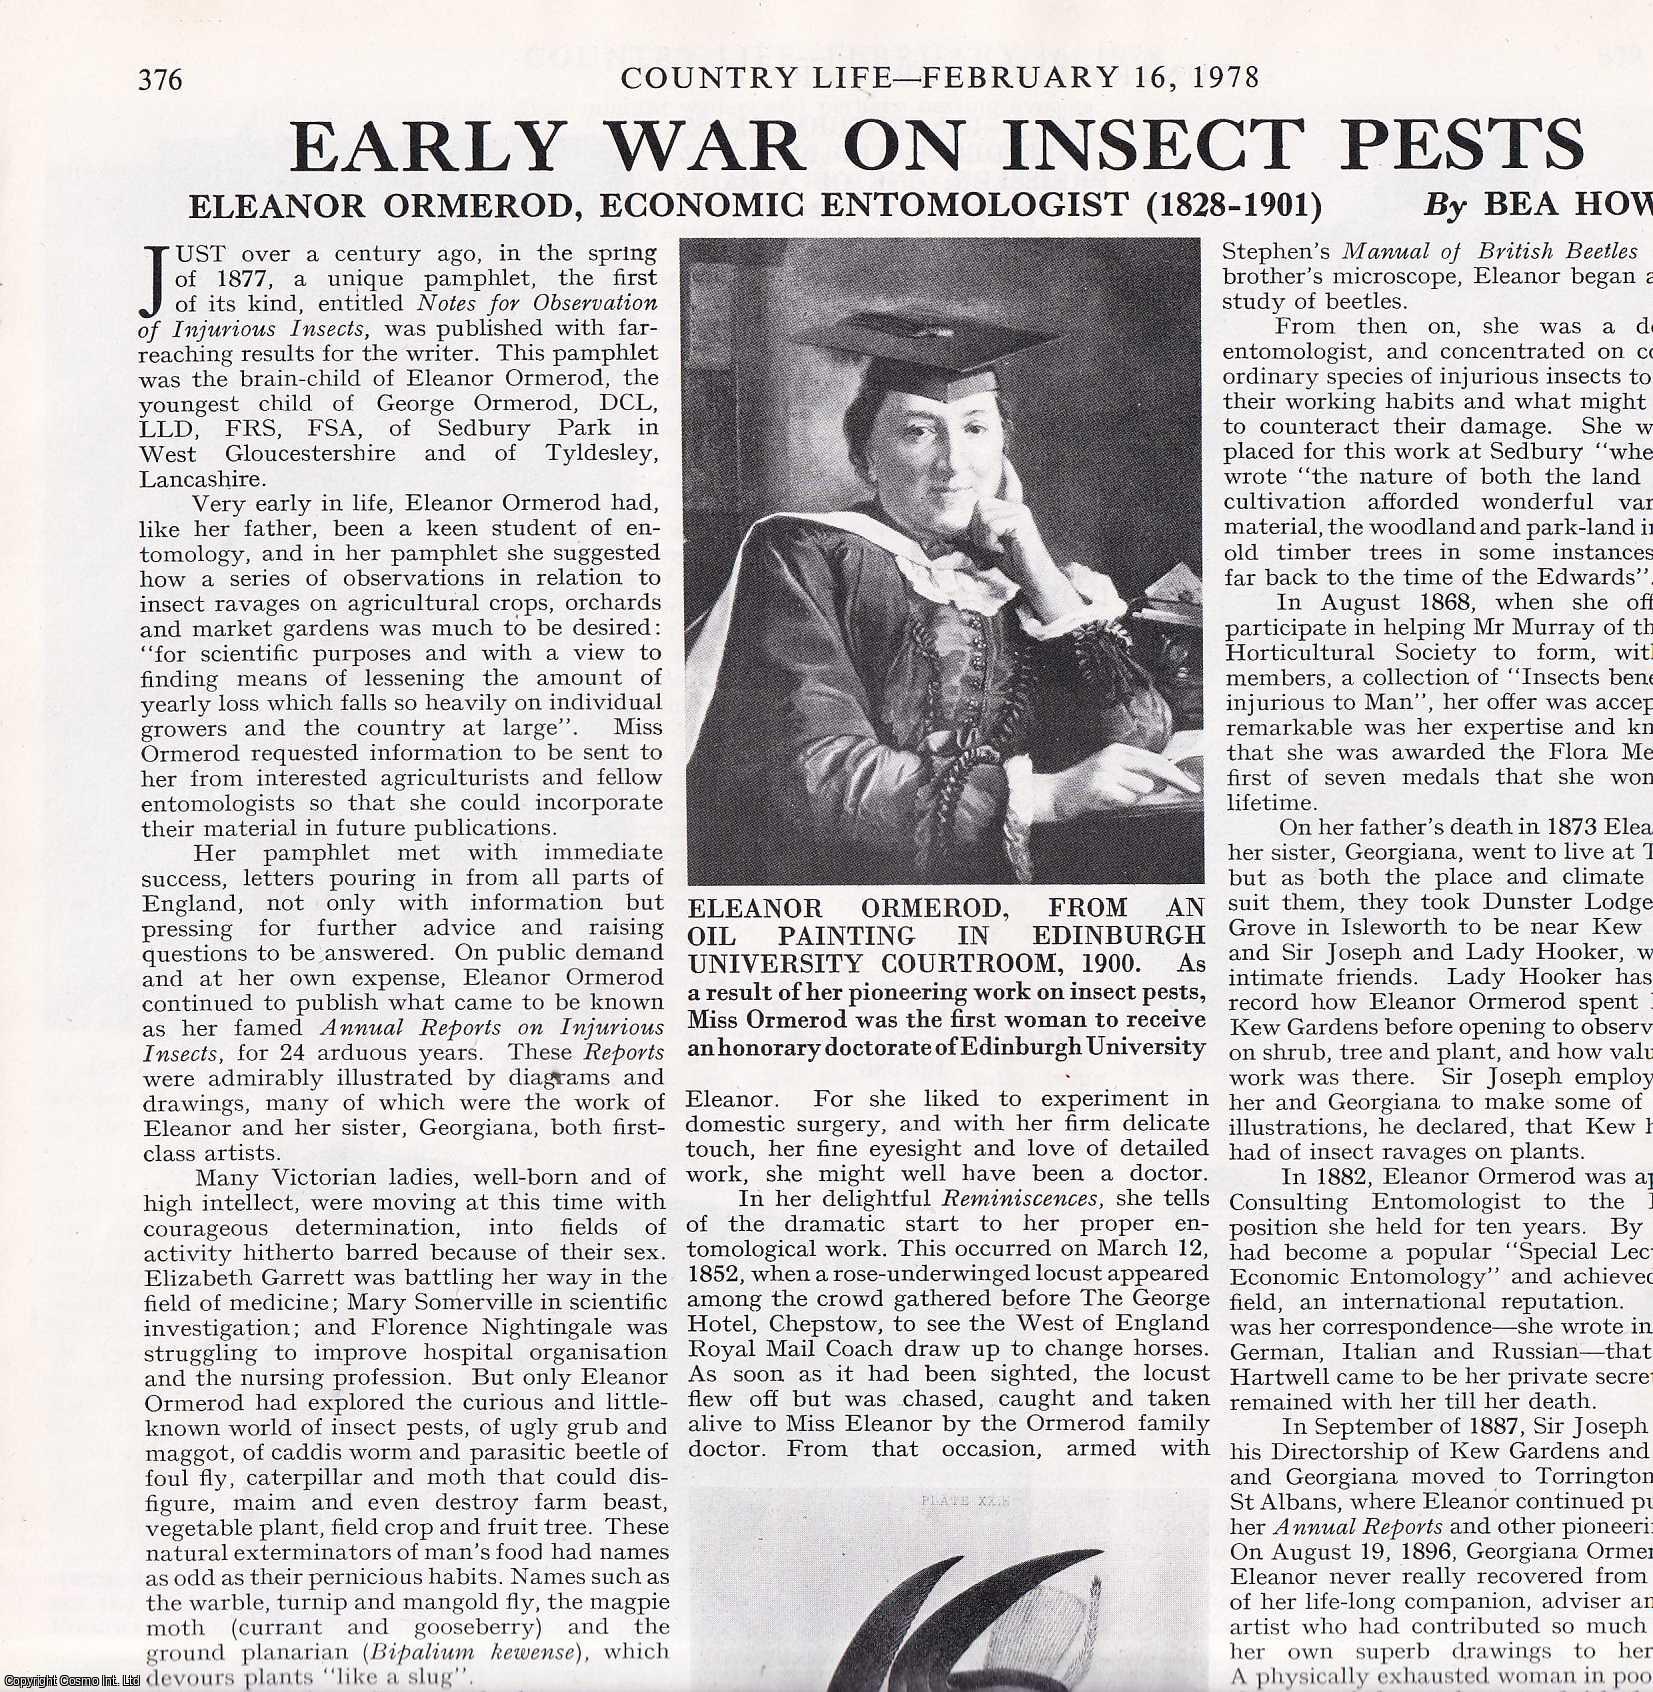 Bea Howe - Eleanor Ormerod, Economic Entomologist (1828-1910): Early War on Insect Pests. Several pictures and accompanying text, removed from an original issue of Country Life Magazine, 1978.